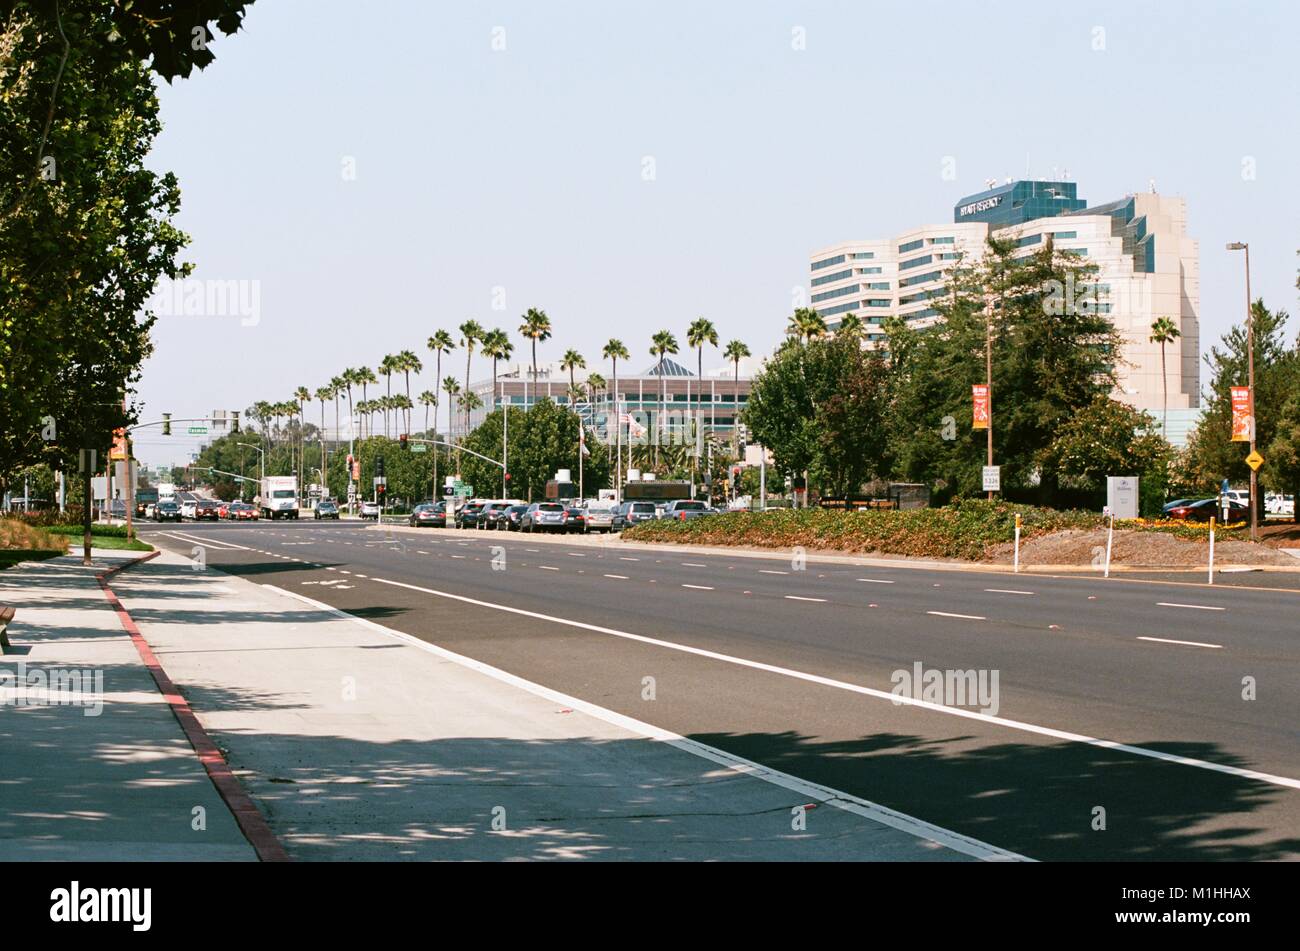 View down the sunny, palm tree lined Great America Parkway, the main thoroughfare in Santa Clara, California, part of the Silicon Valley, August 17, 2017. () Stock Photo